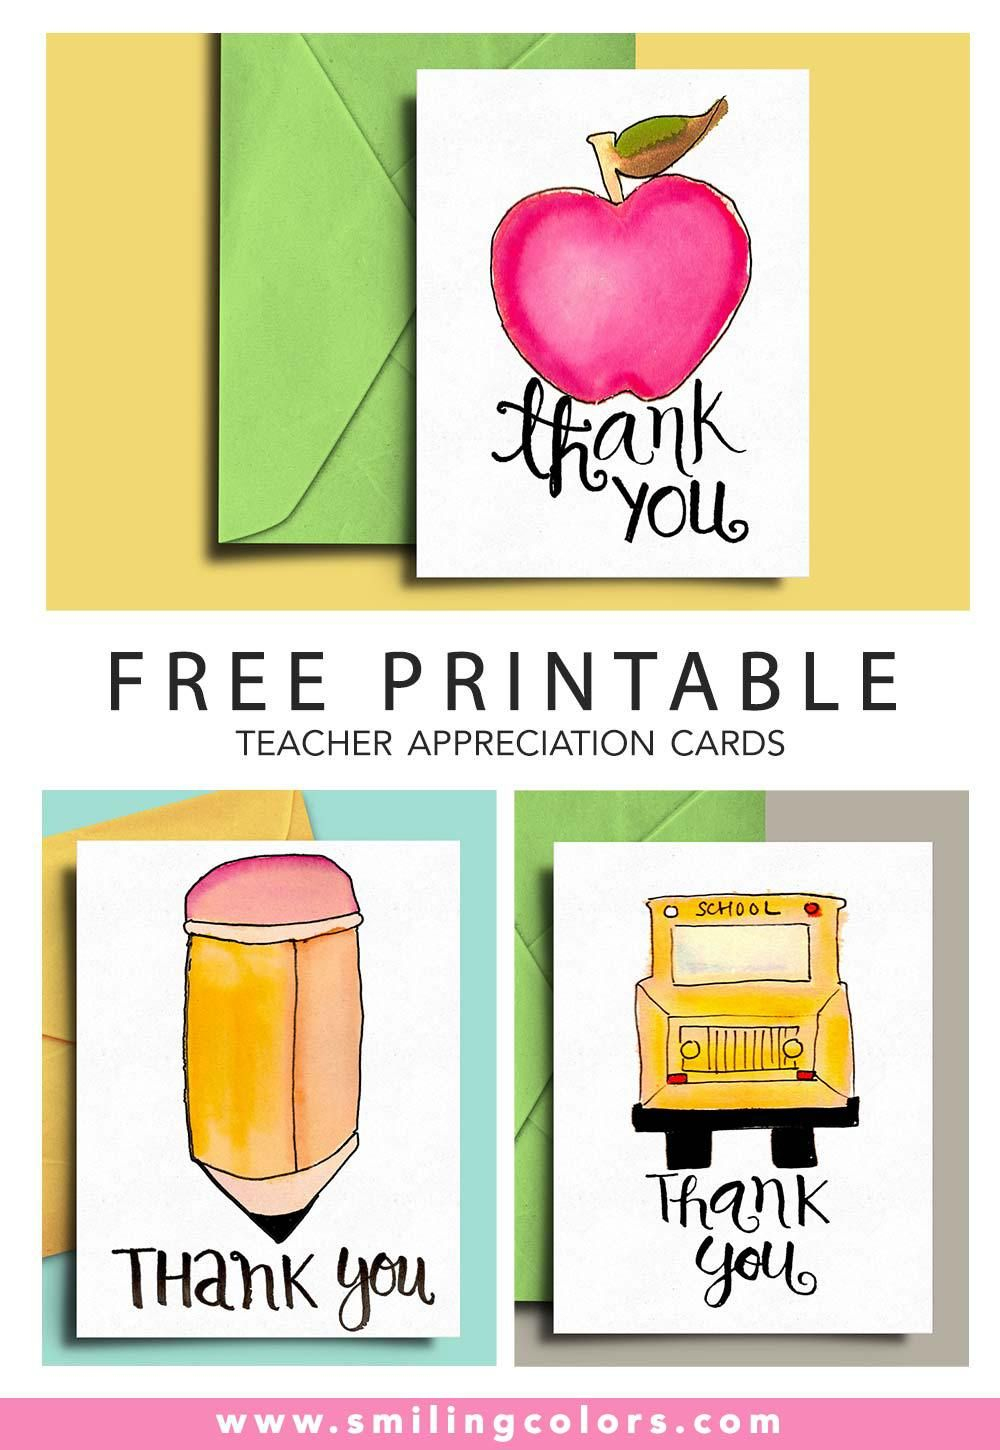 Thank You Card For Teacher And School Bus Driver With Free - Free Printable Teacher Appreciation Cards